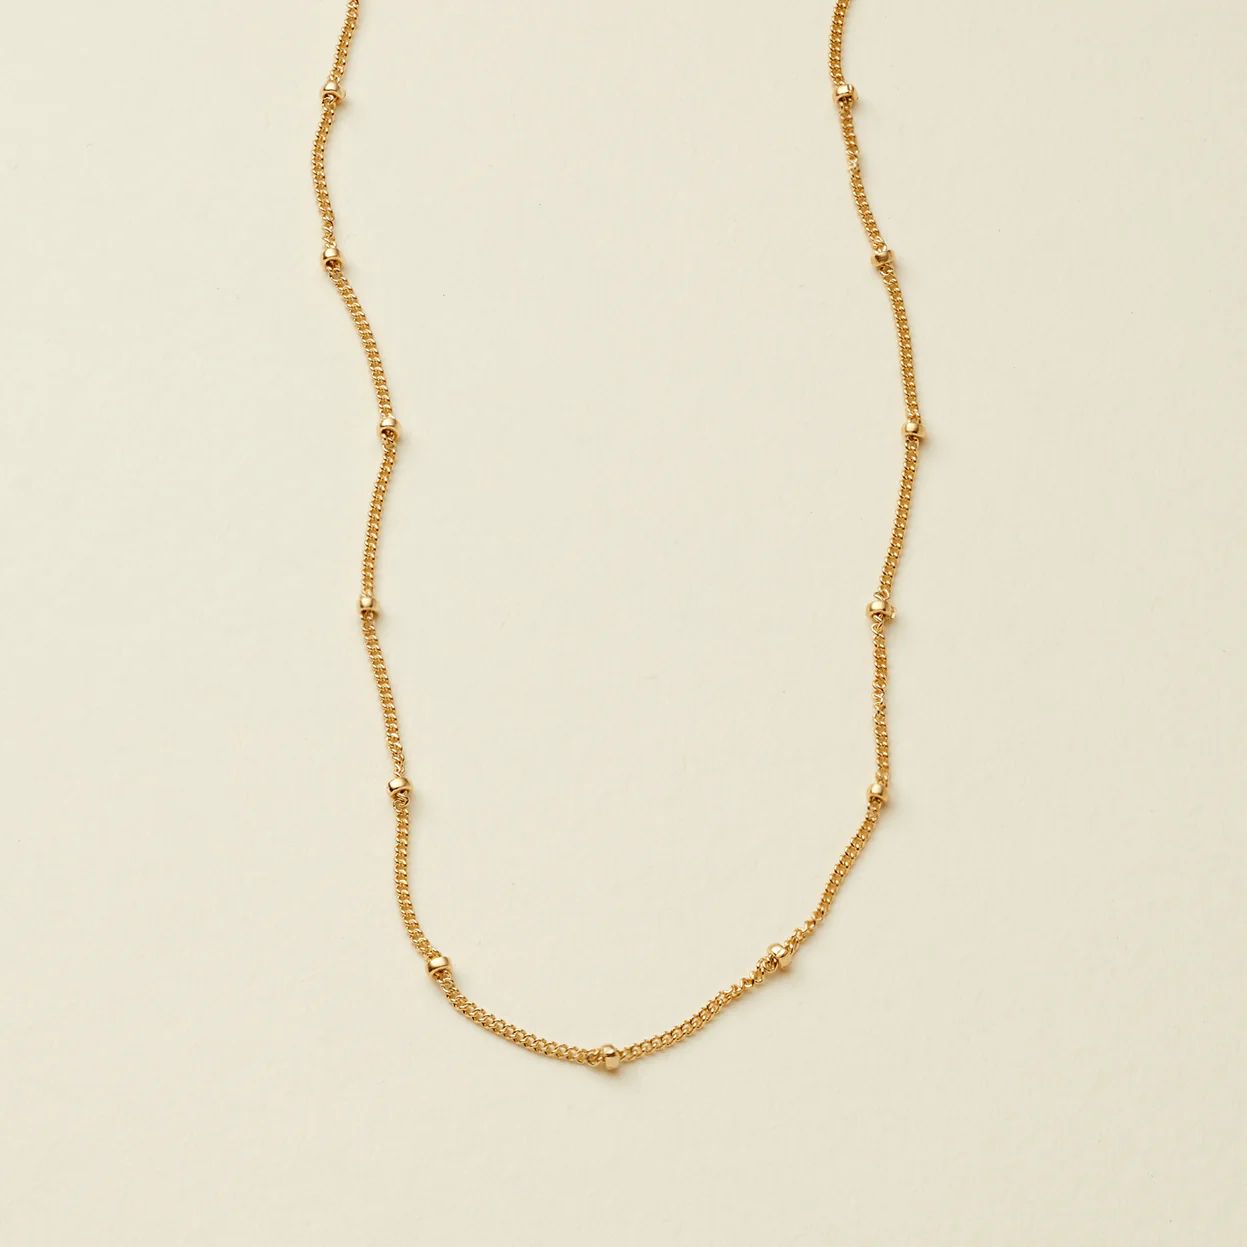 Satellite Chain | Made by Mary (US)